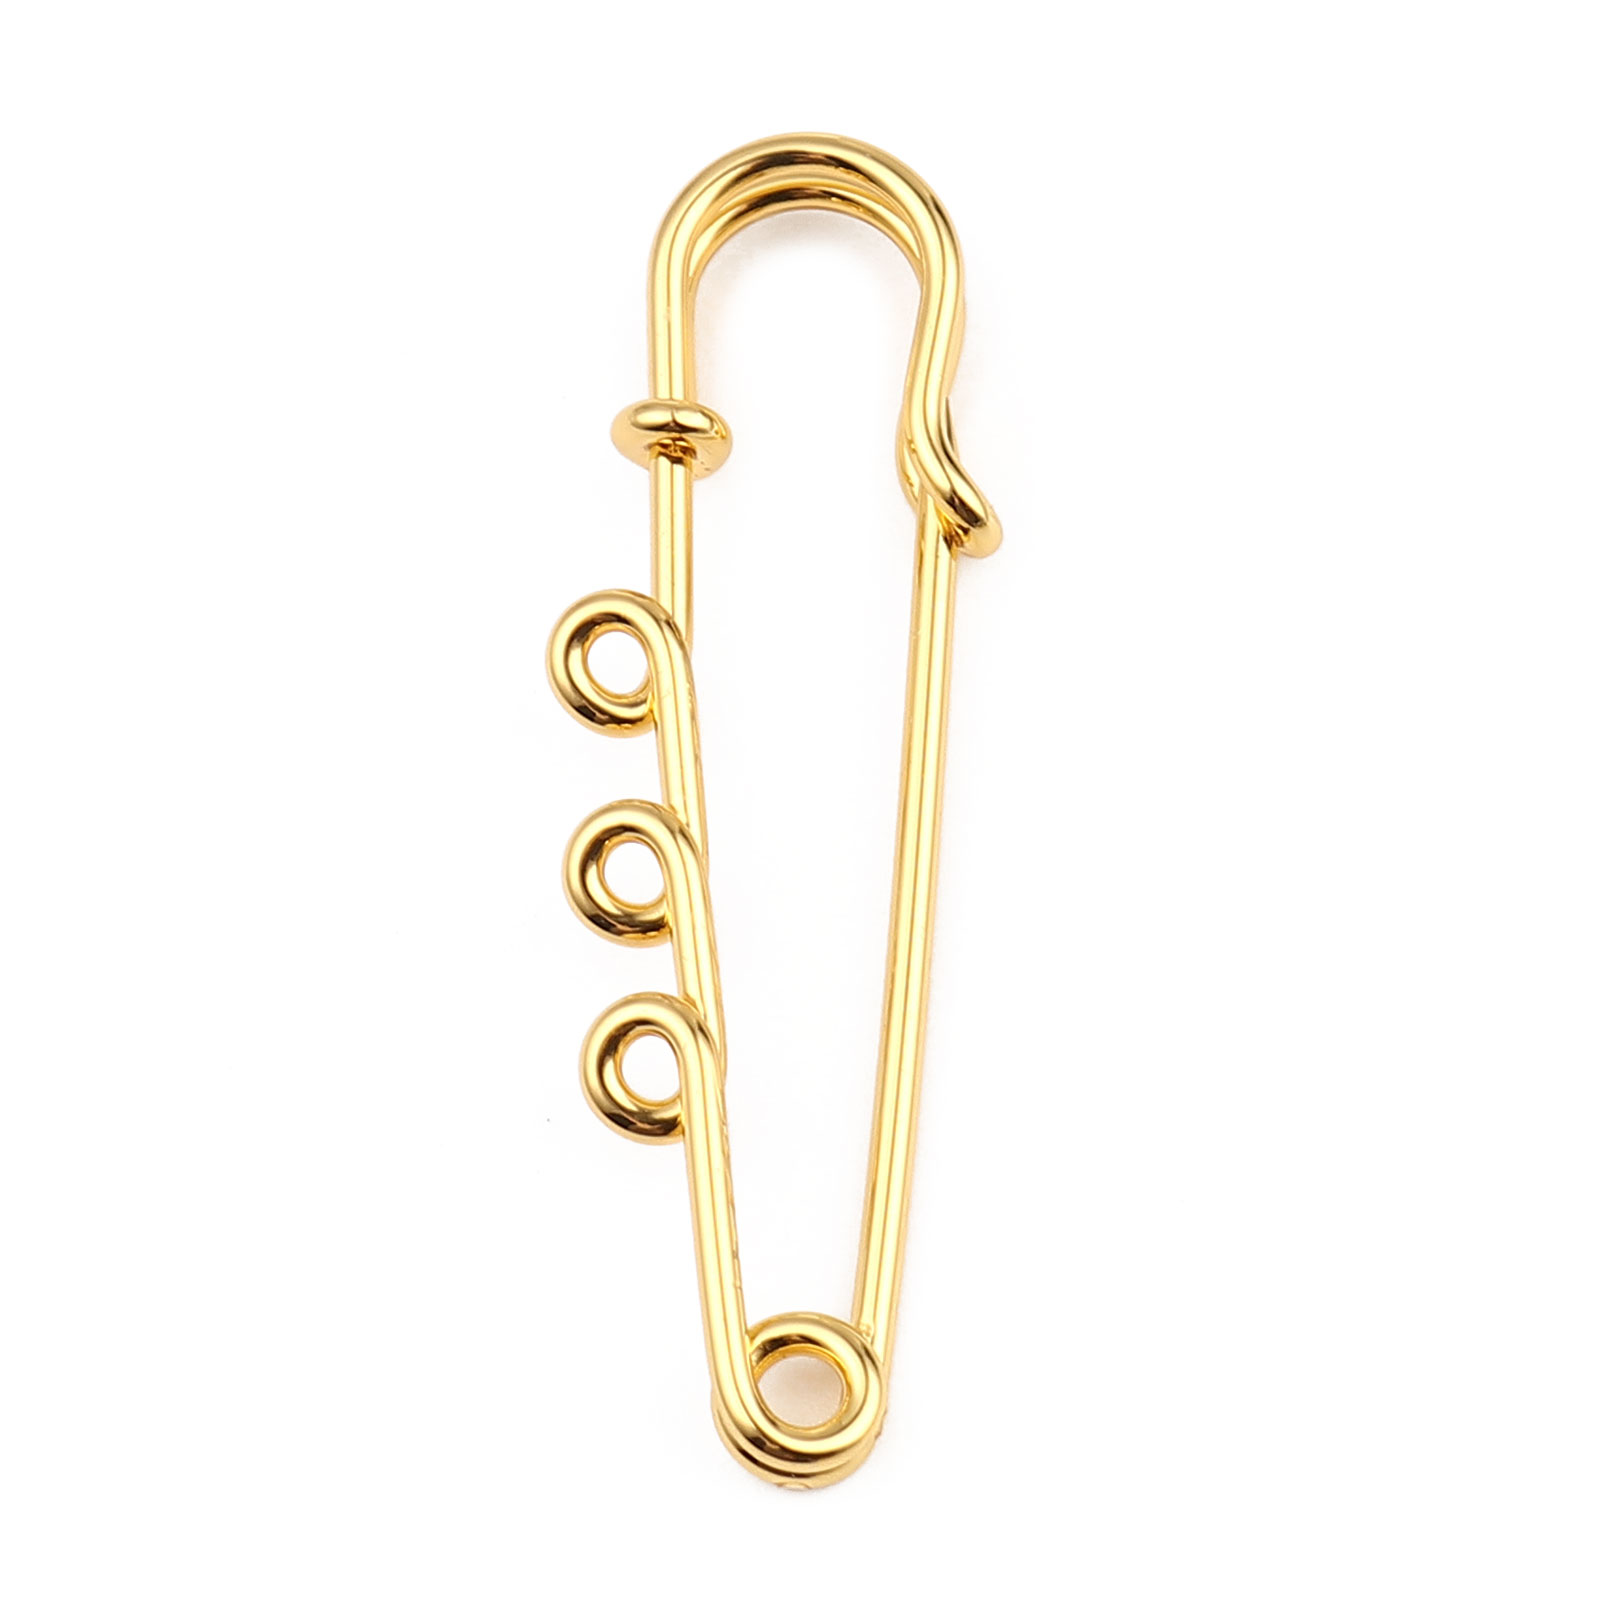 Picture of Iron Based Alloy Safety Pin Brooches Connectors Findings Gold Plated 3 Loops 50mm(2") x 17mm( 5/8"), 10 PCs